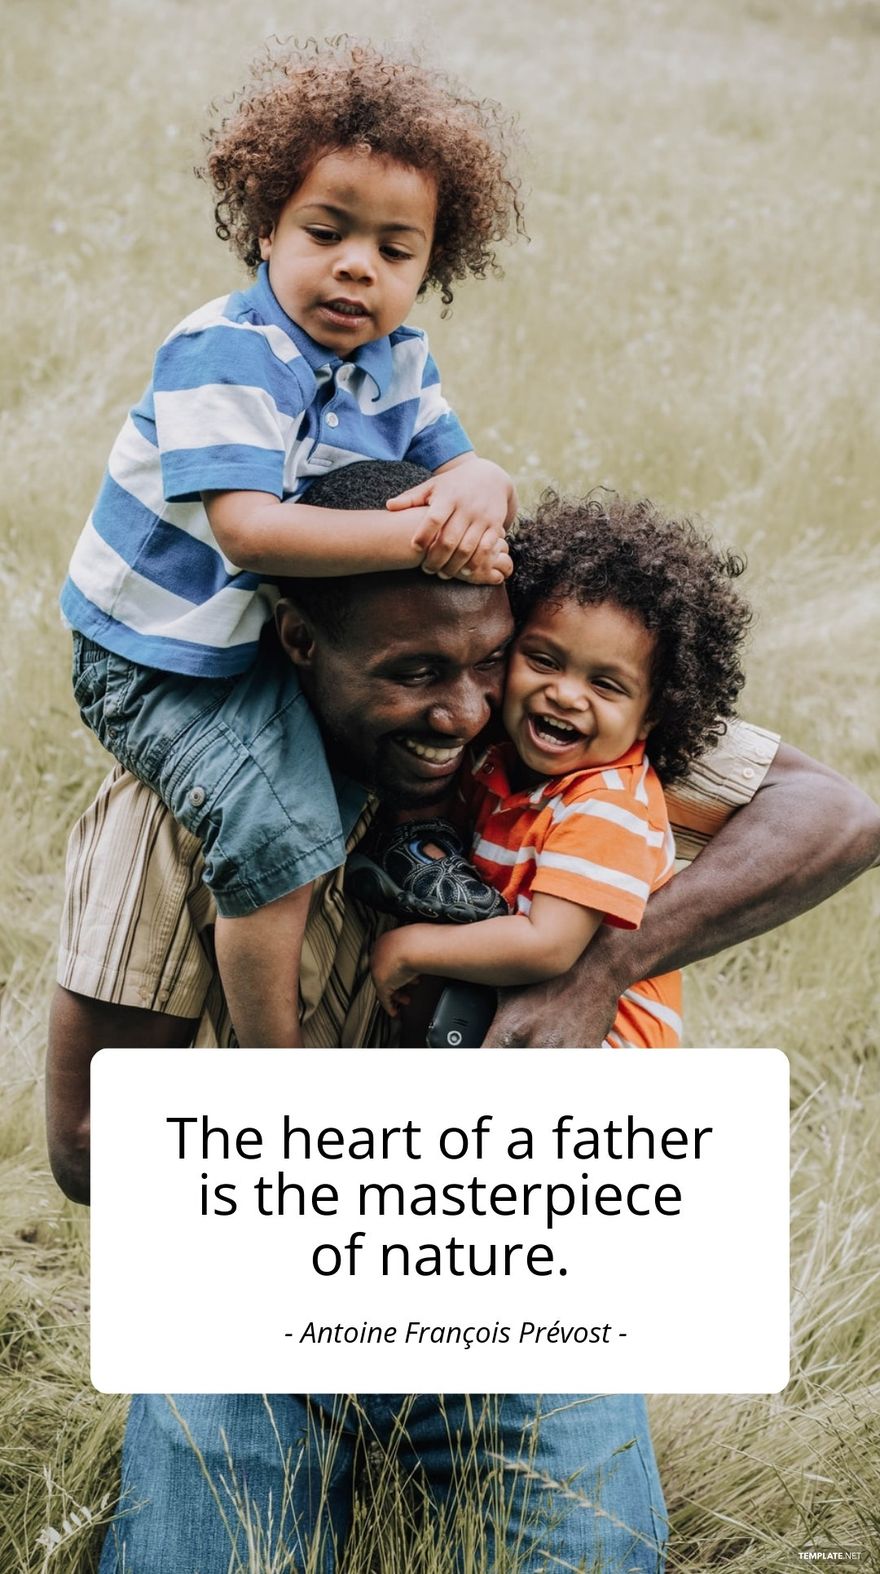 Free Antoine François Prévost - The heart of a father is the masterpiece of nature. in JPG